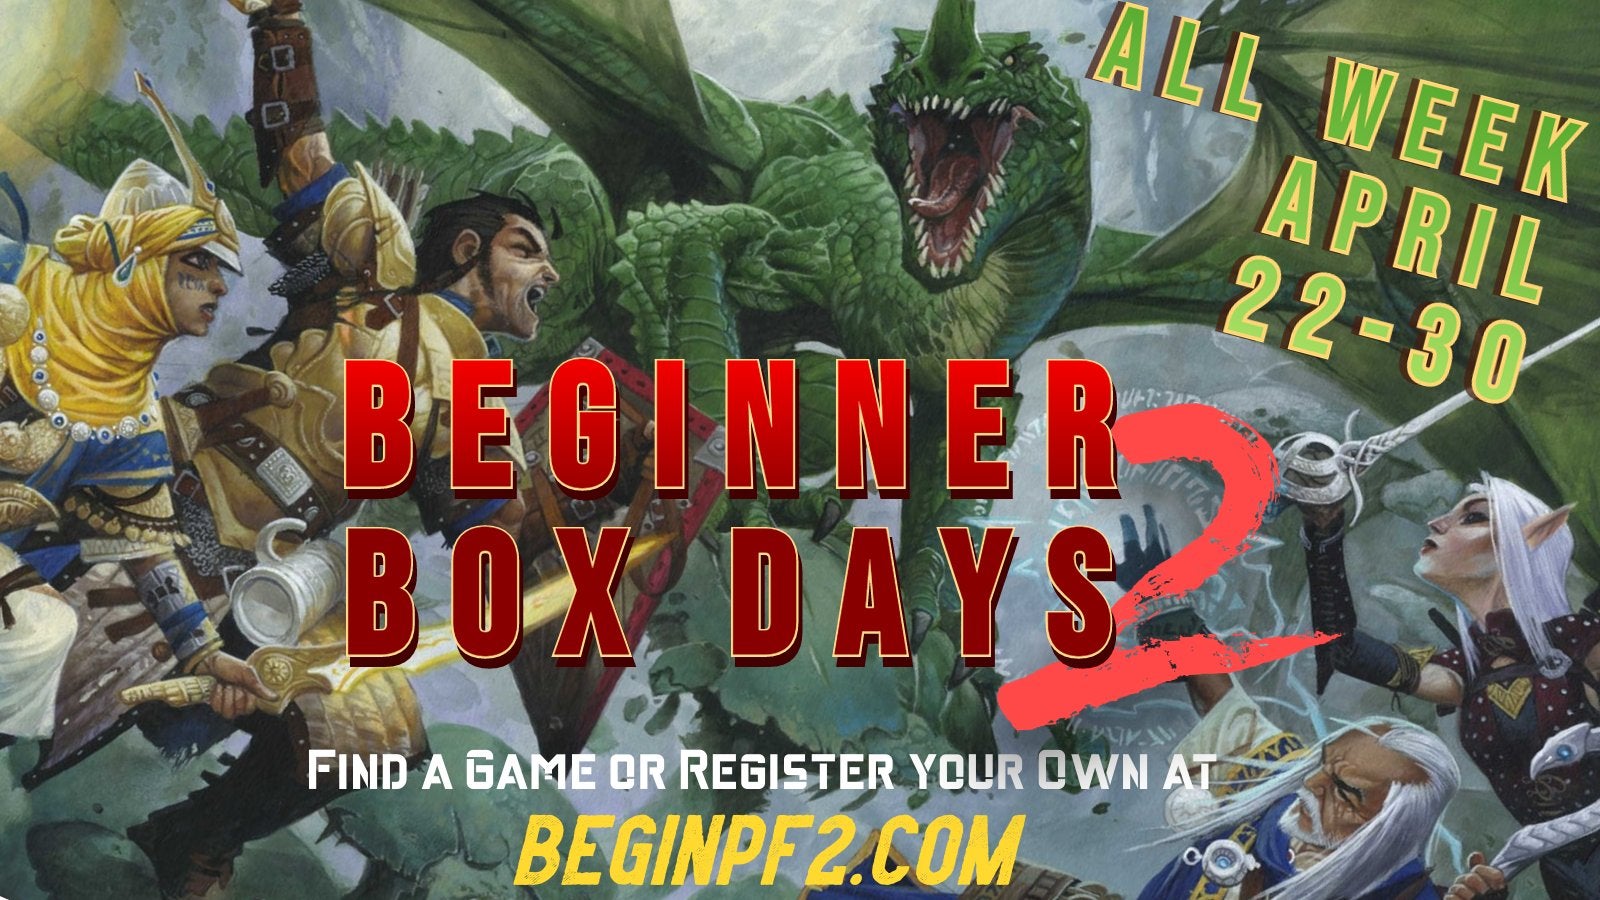 Beginner Box Days 2: Find a game or register your own at BEGINPF2.com - All week April 22nd through the 30th